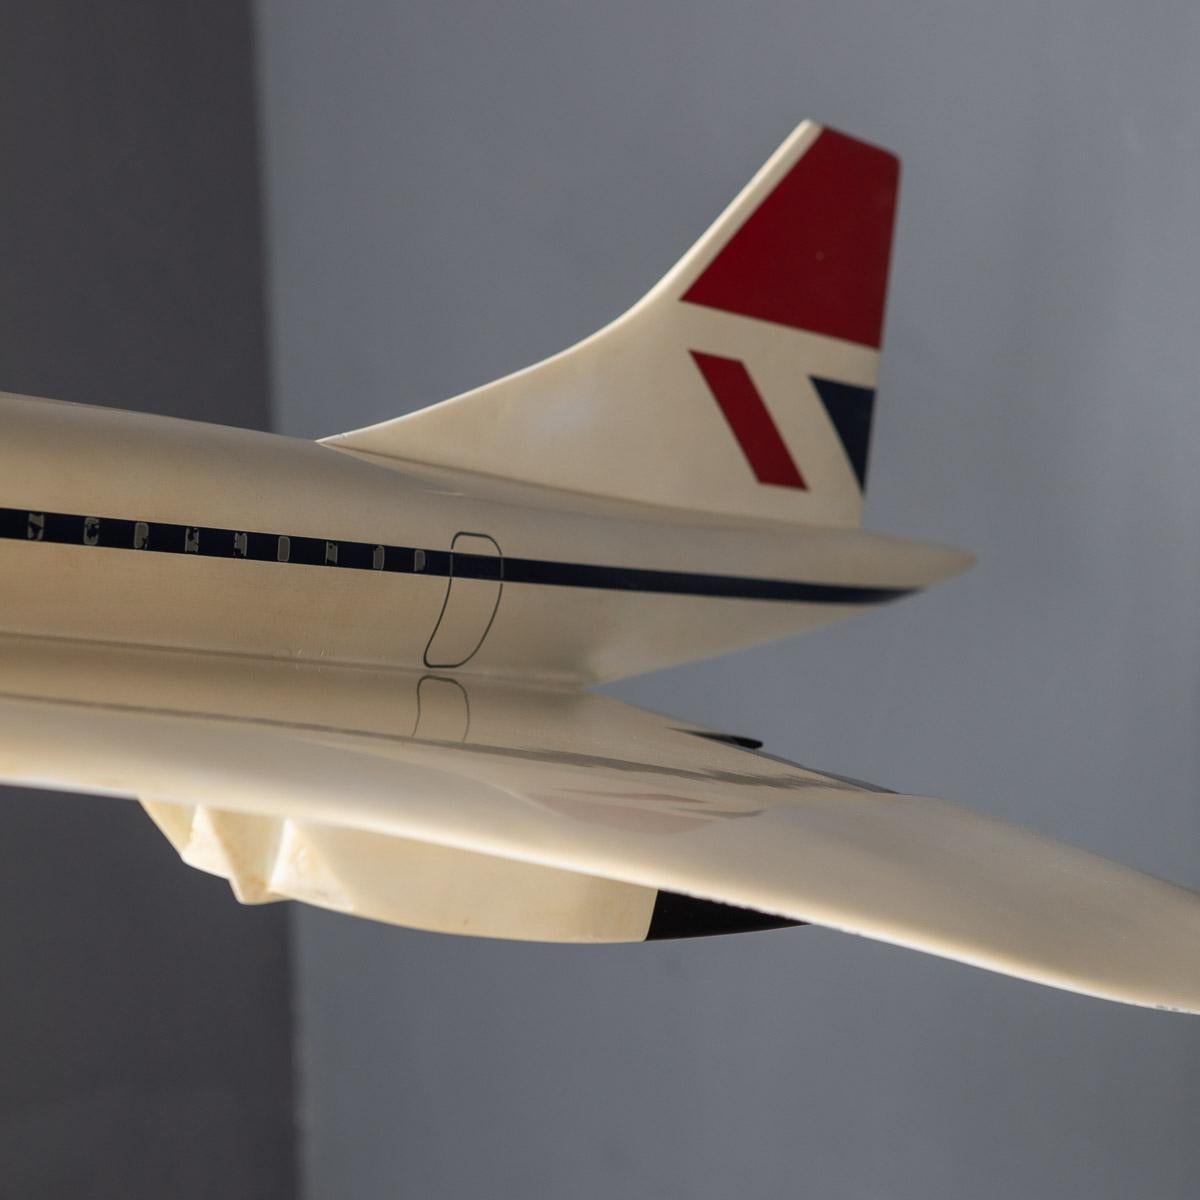 Concorde Model Made by Space Models, England, c.1990 3